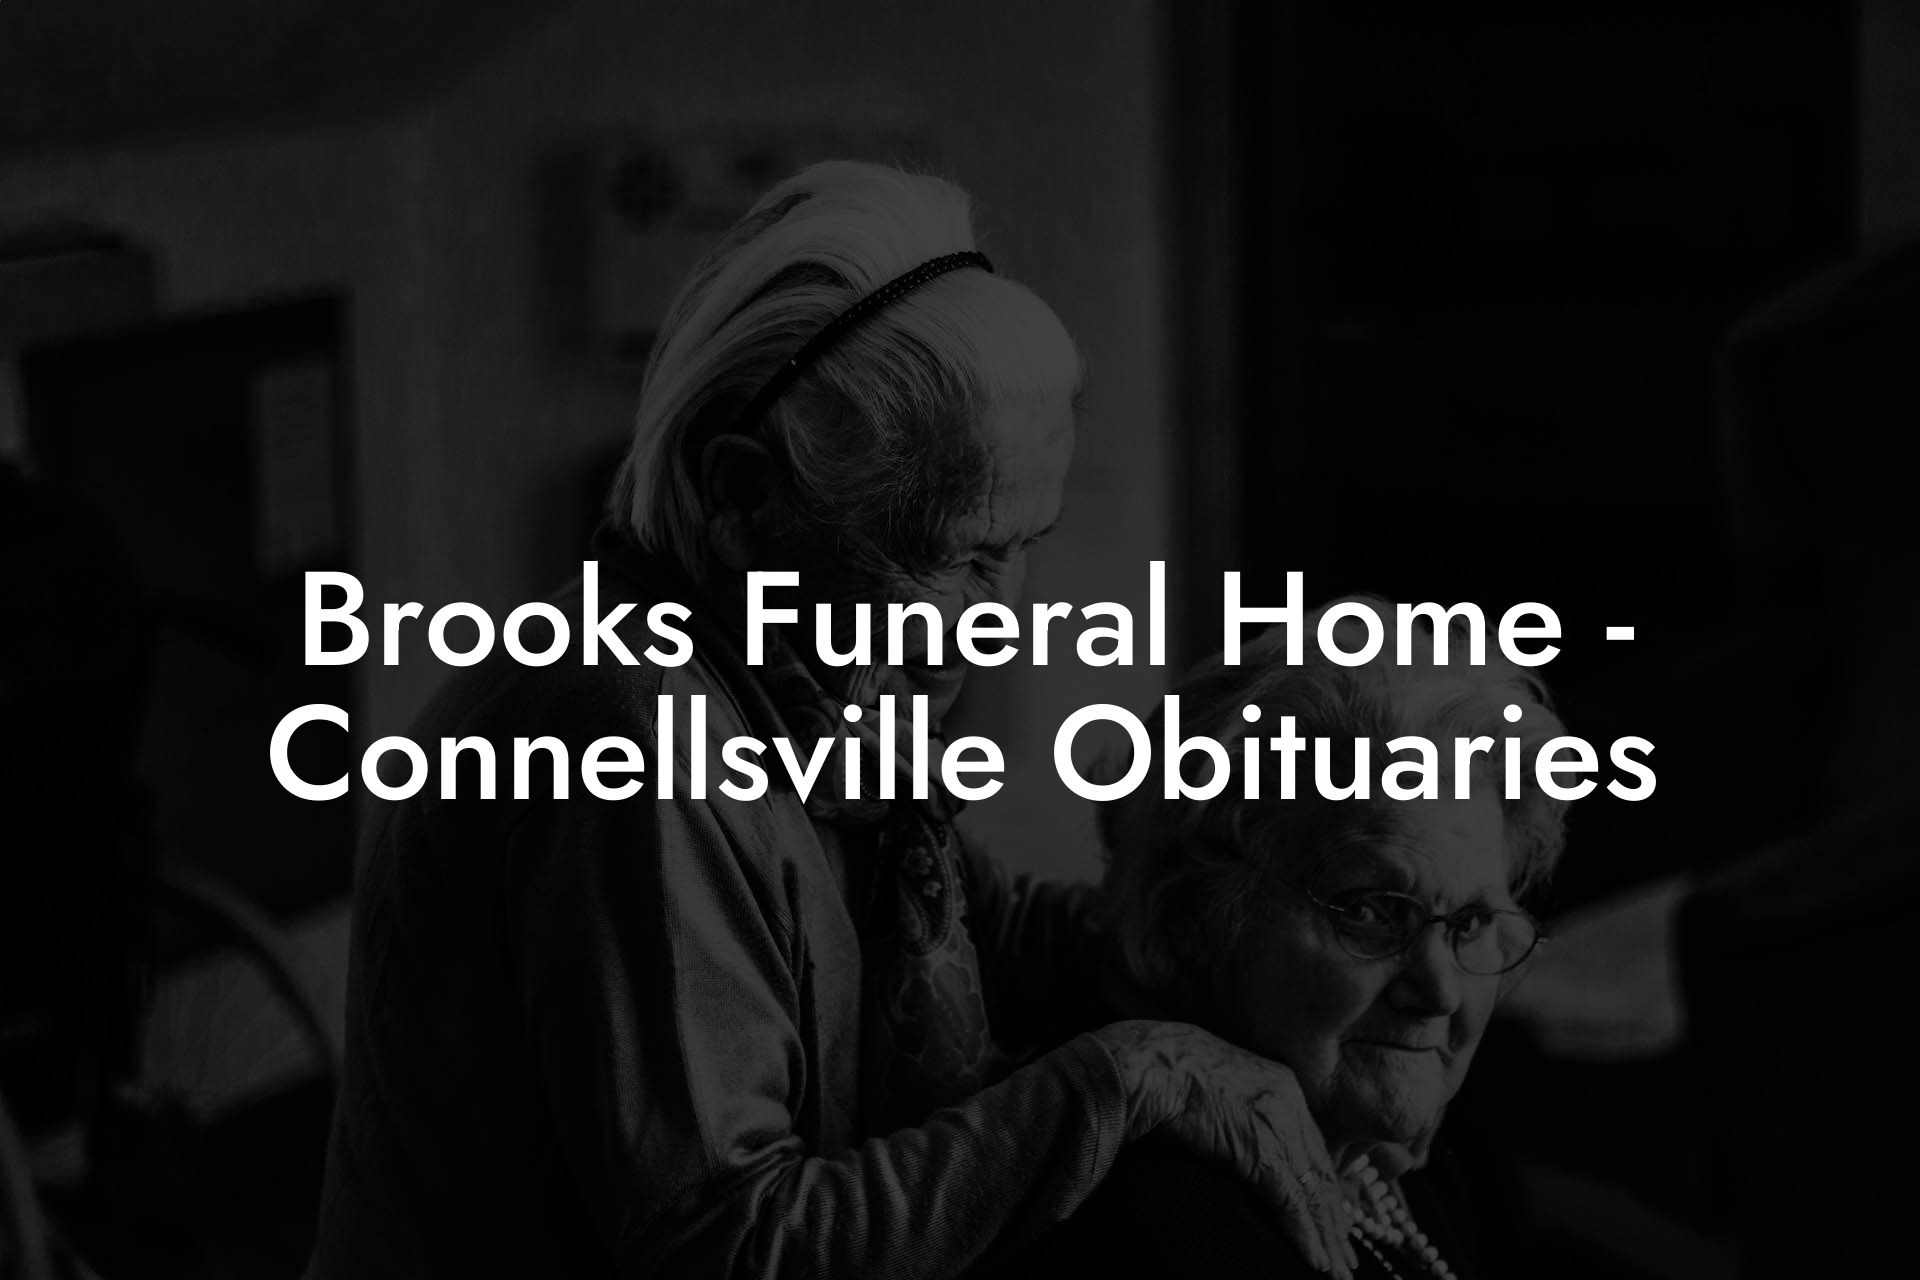 Brooks Funeral Home - Connellsville Obituaries